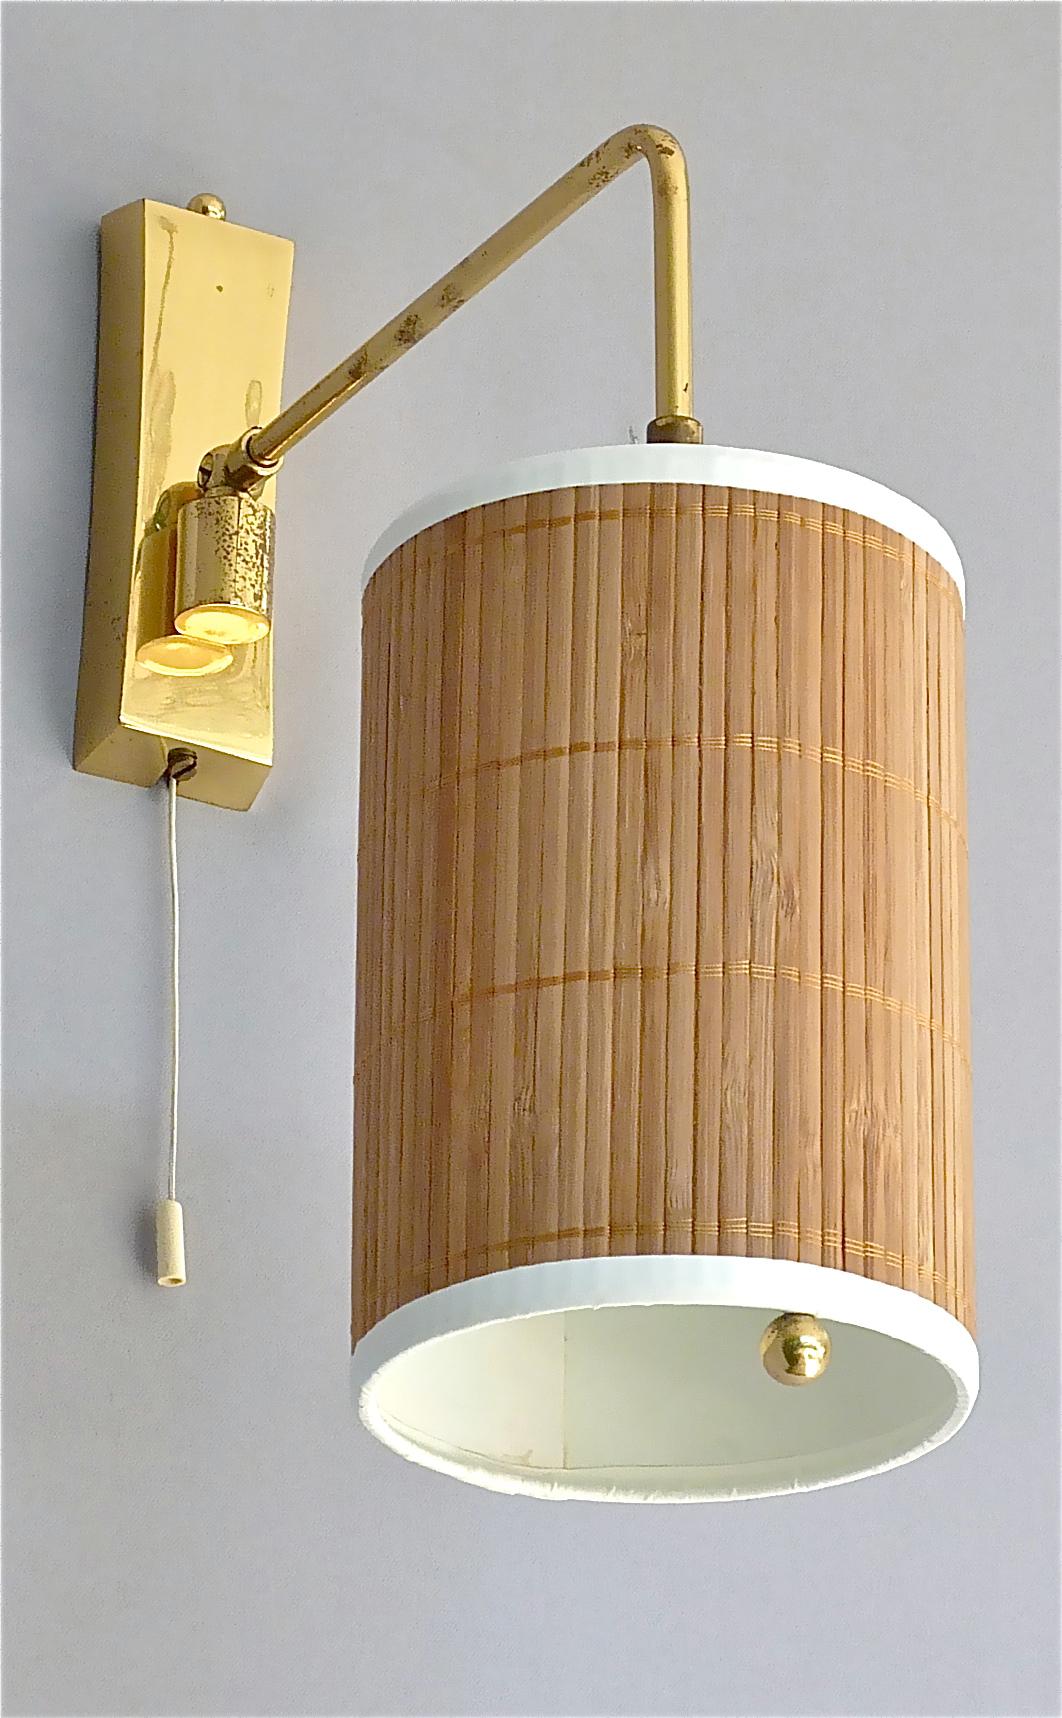 Mid-20th Century Wall Lamp Paavo Tynell Taito Oy Kalmar Style Brass Cane Wood Shade 1950s Sconce For Sale